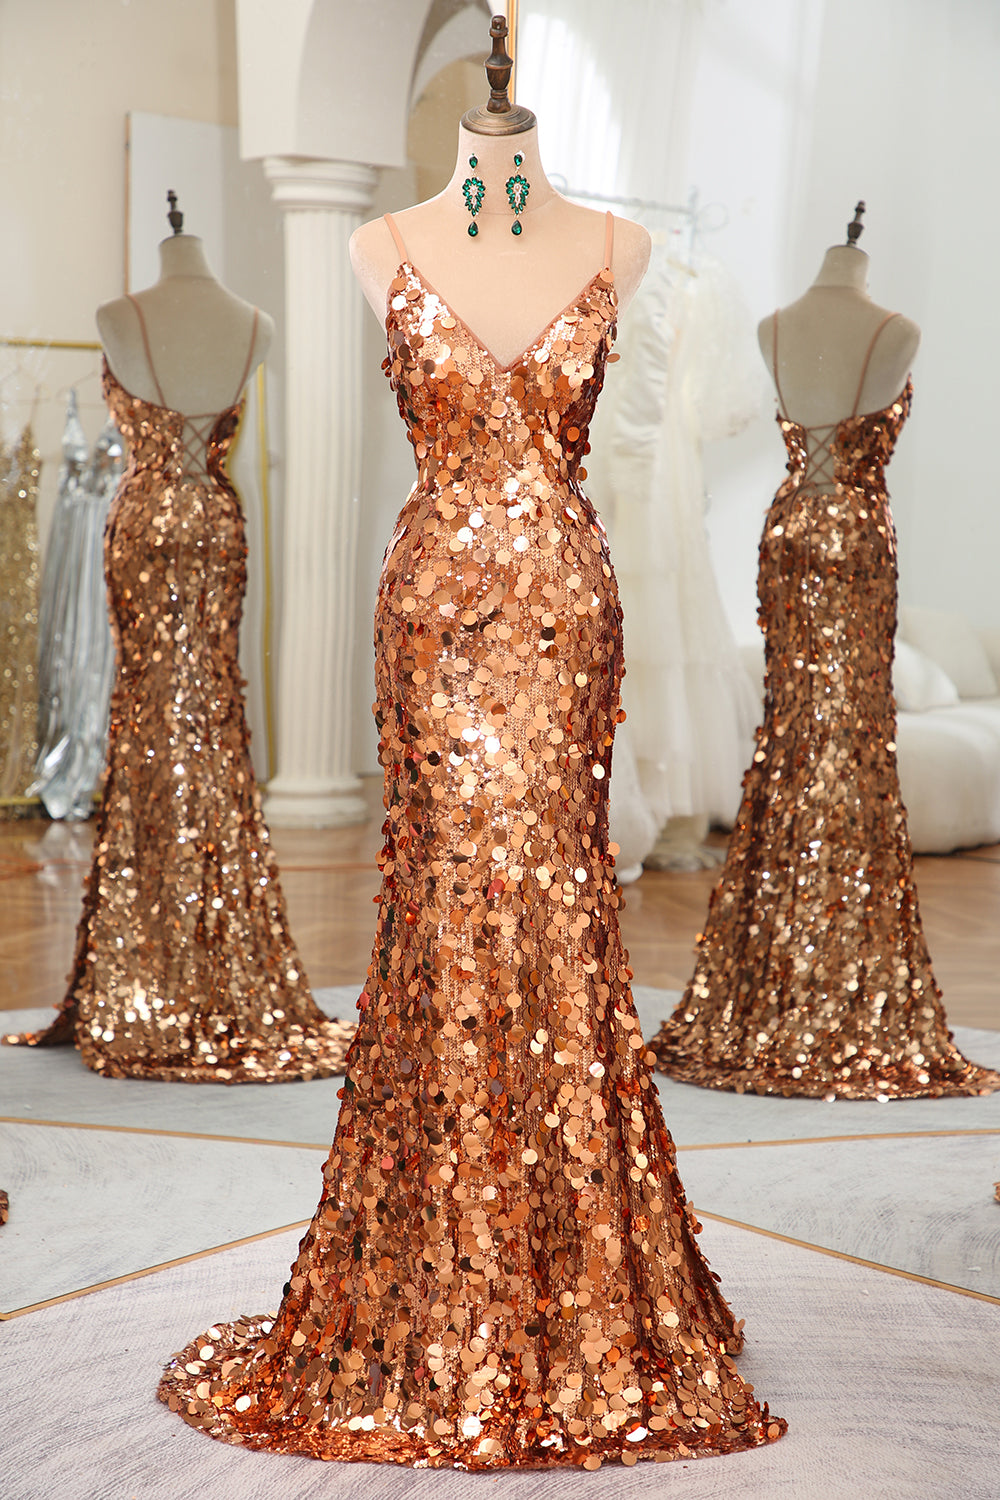 Prom Dresses 3 26 Sleeves, Sparkly Rose Golden Mermaid Spaghetti Straps Long Sequin Prom Dress With Split